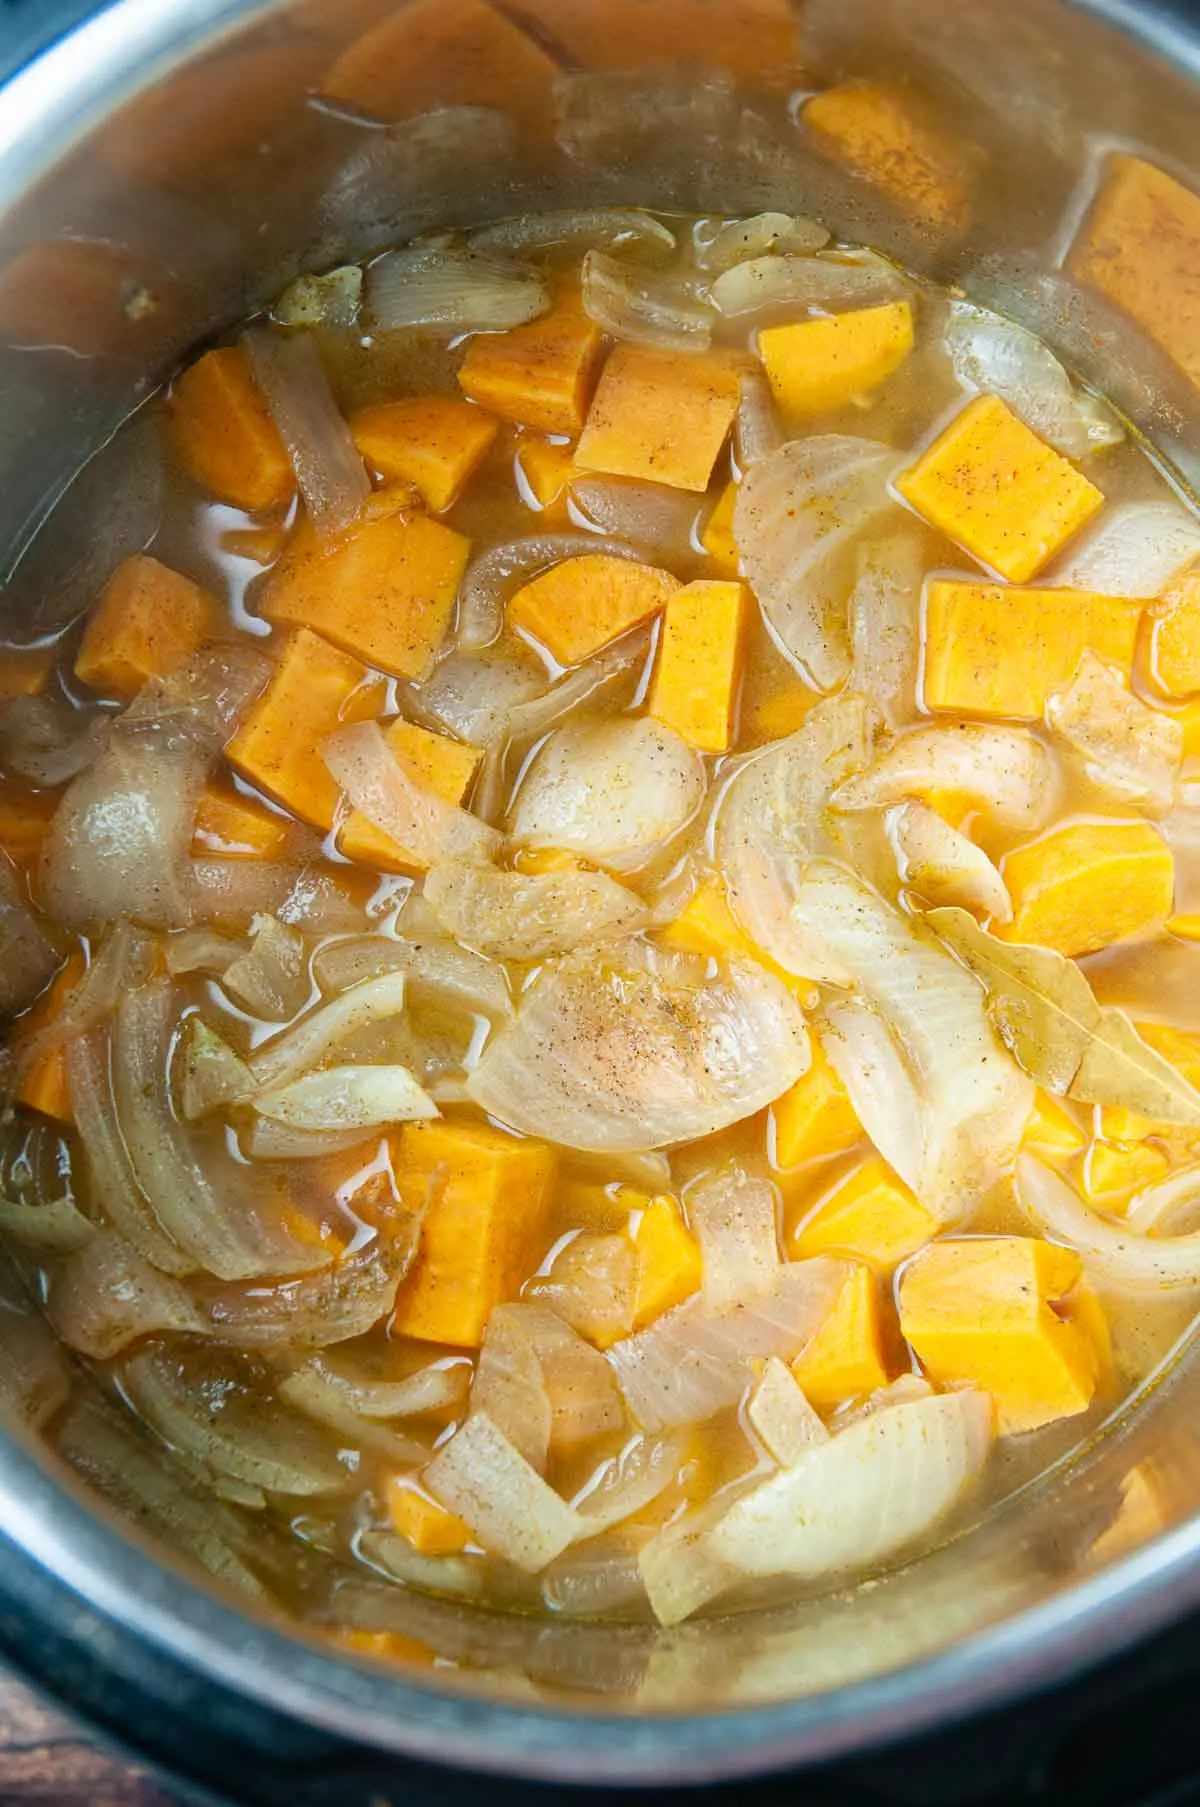 After pressure cooking the onions and sweet potatoes in spices and broth they should be soft.